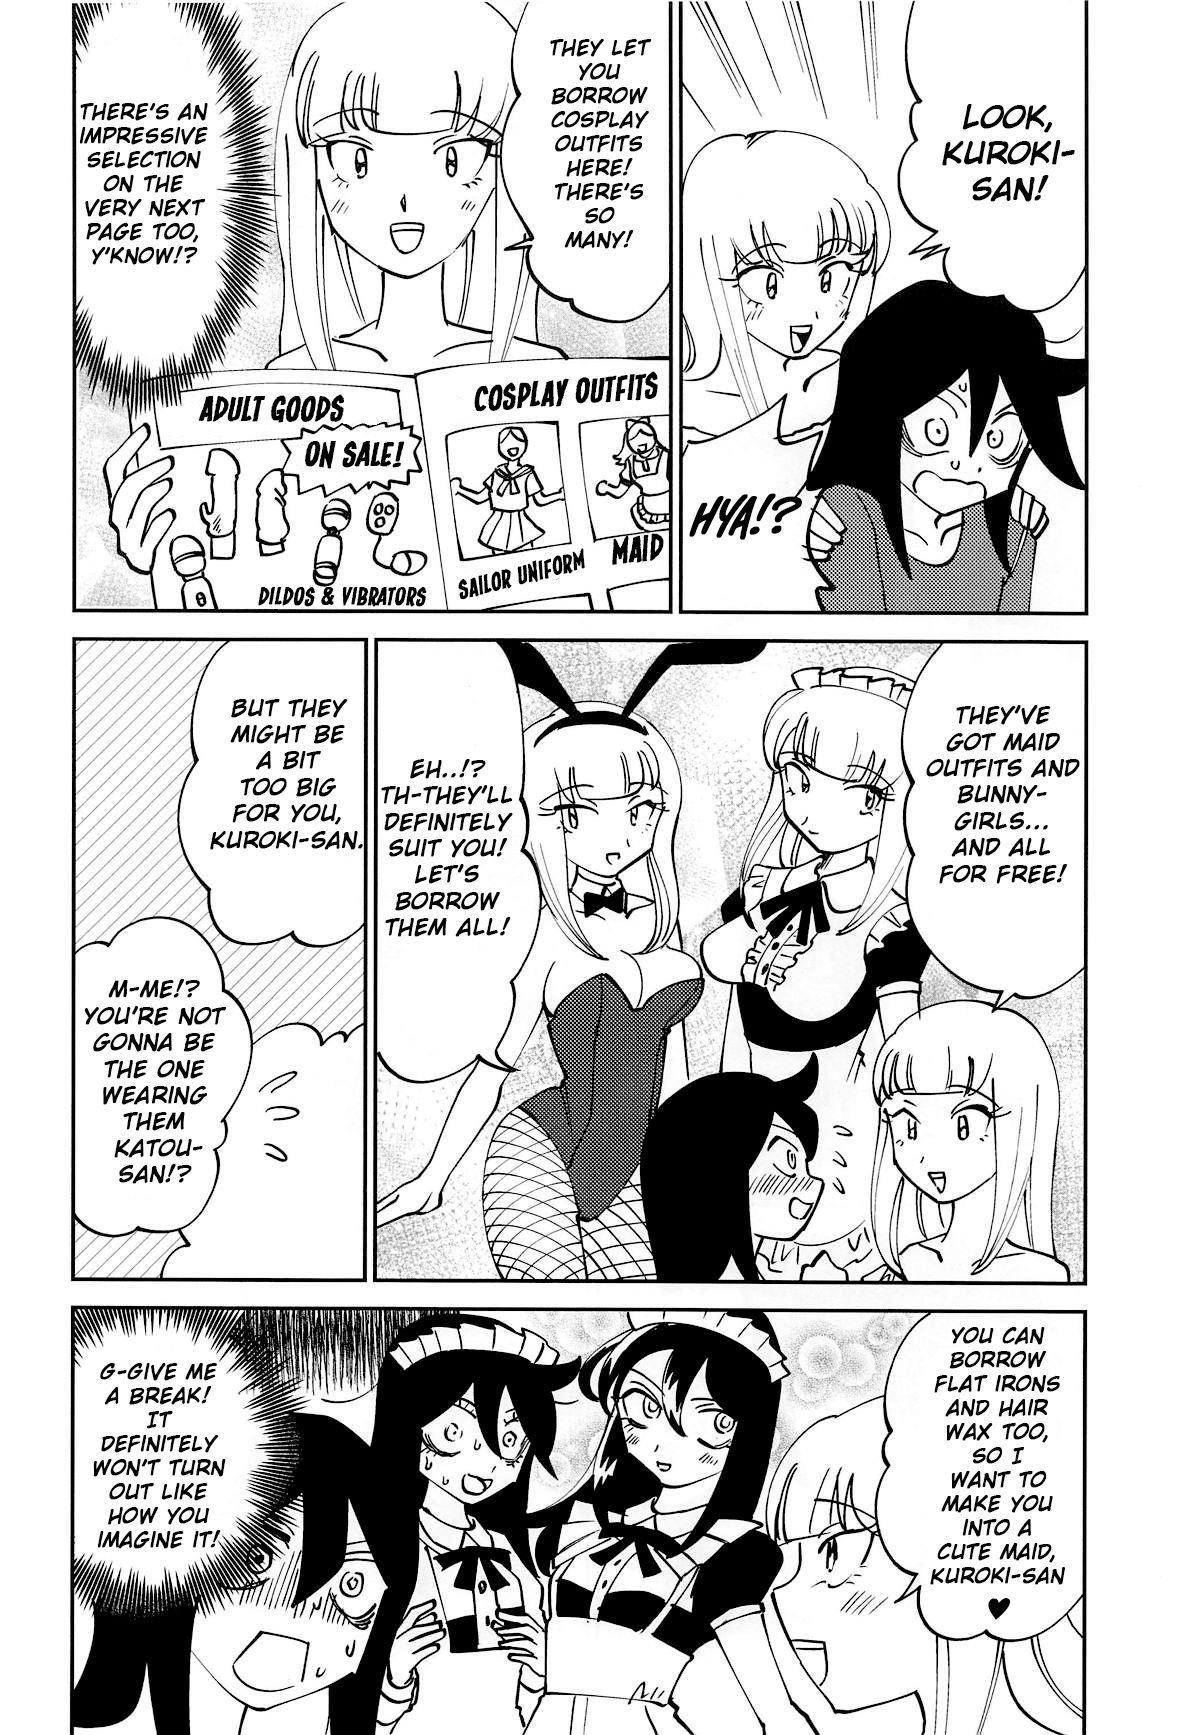 Argenta Kuroki-san, Anone. - Its not my fault that im not popular Naked - Page 7